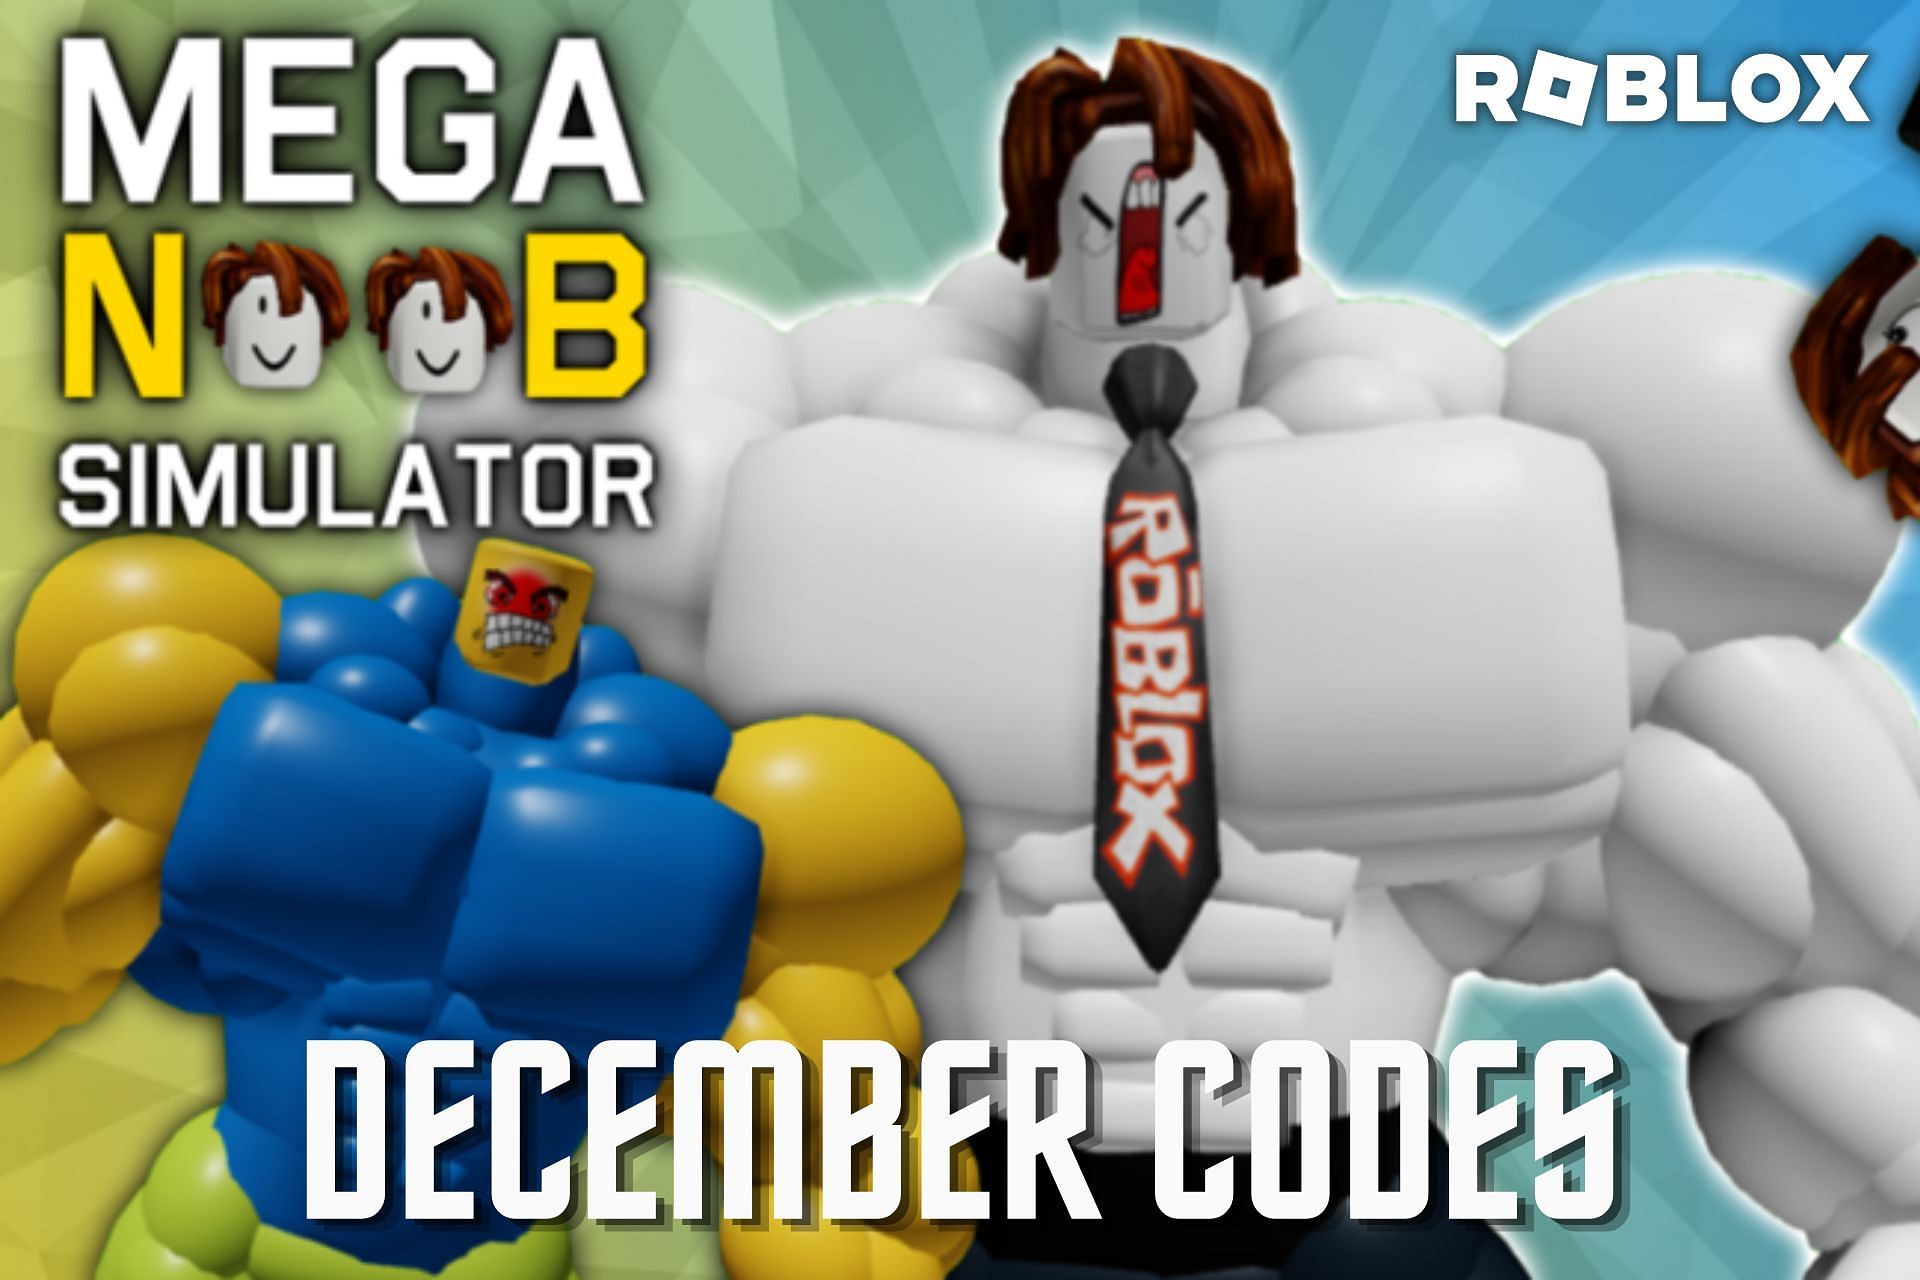 roblox-mega-noob-simulator-codes-for-december-2022-free-coins-pets-and-more